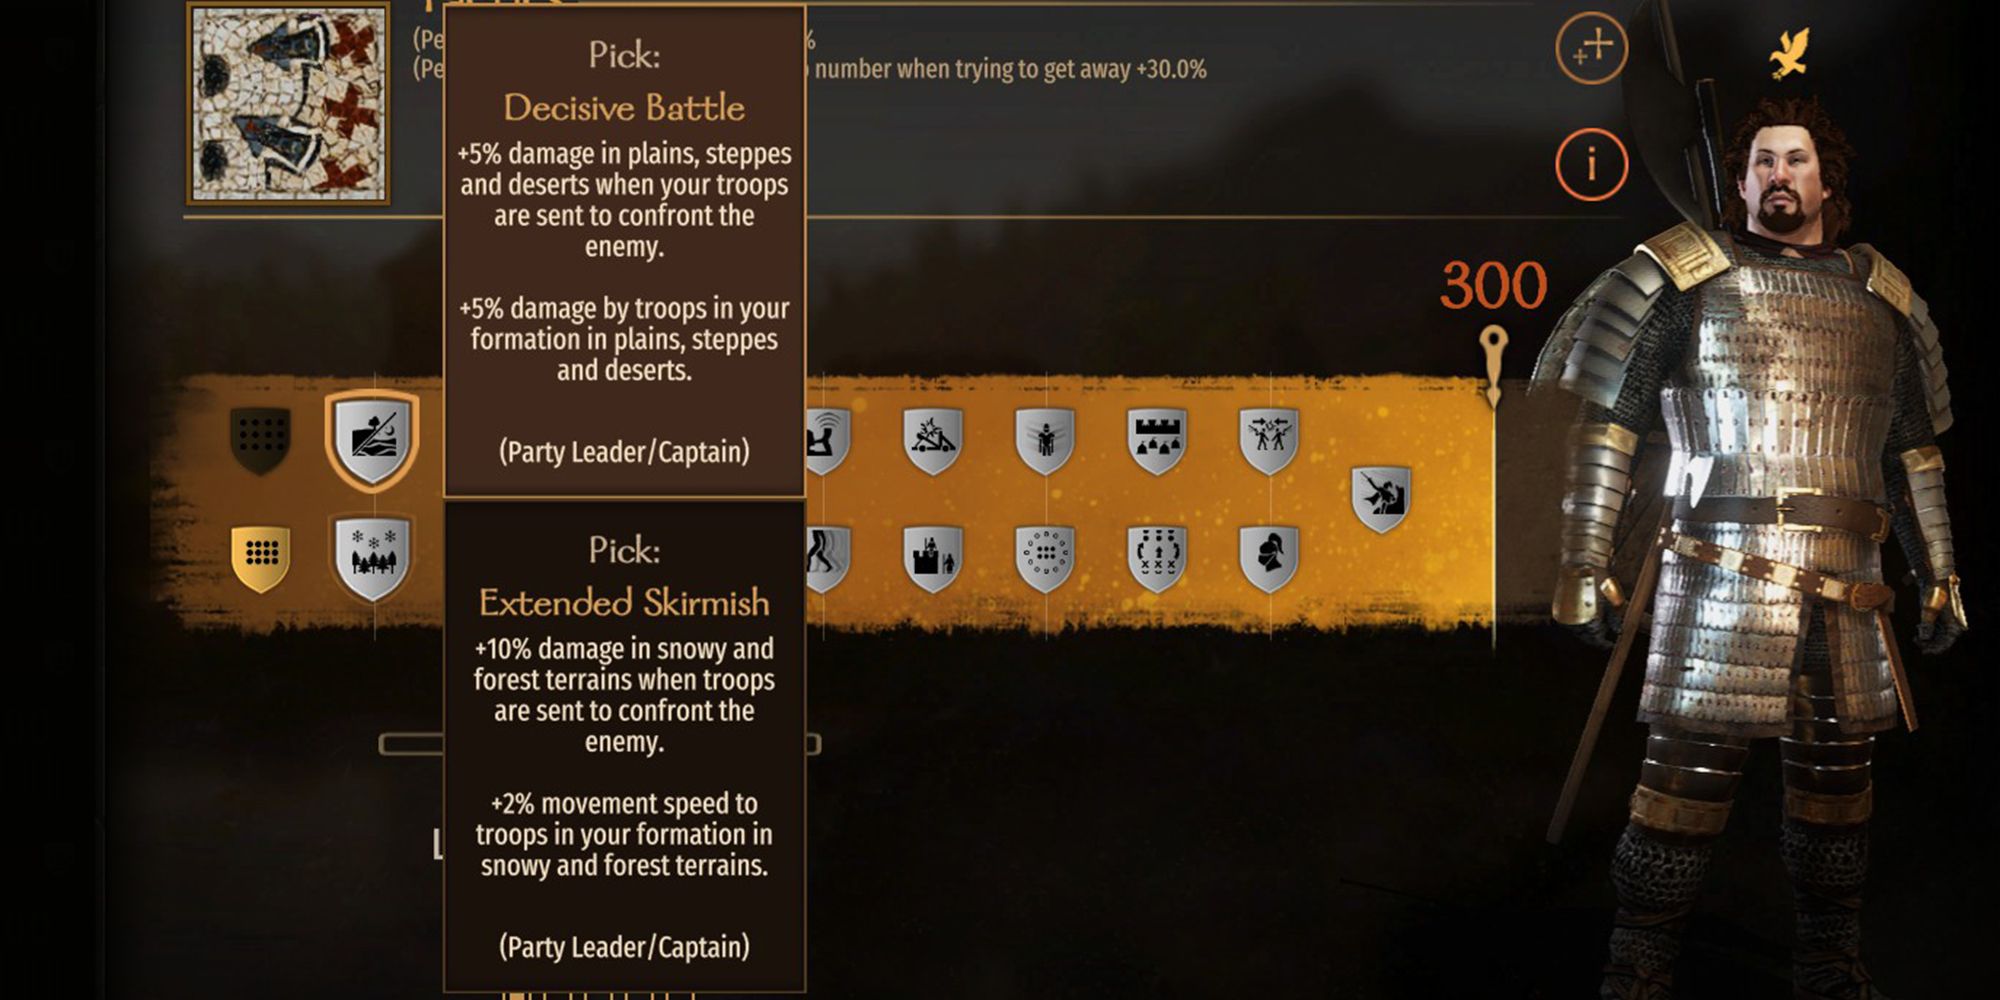 Tactical Showdown Perk Menu Description +5% damage in plains, grasslands, and deserts when troops are sent to face the enemy. +5% damage from units in formation on plains, grasslands, and deserts.